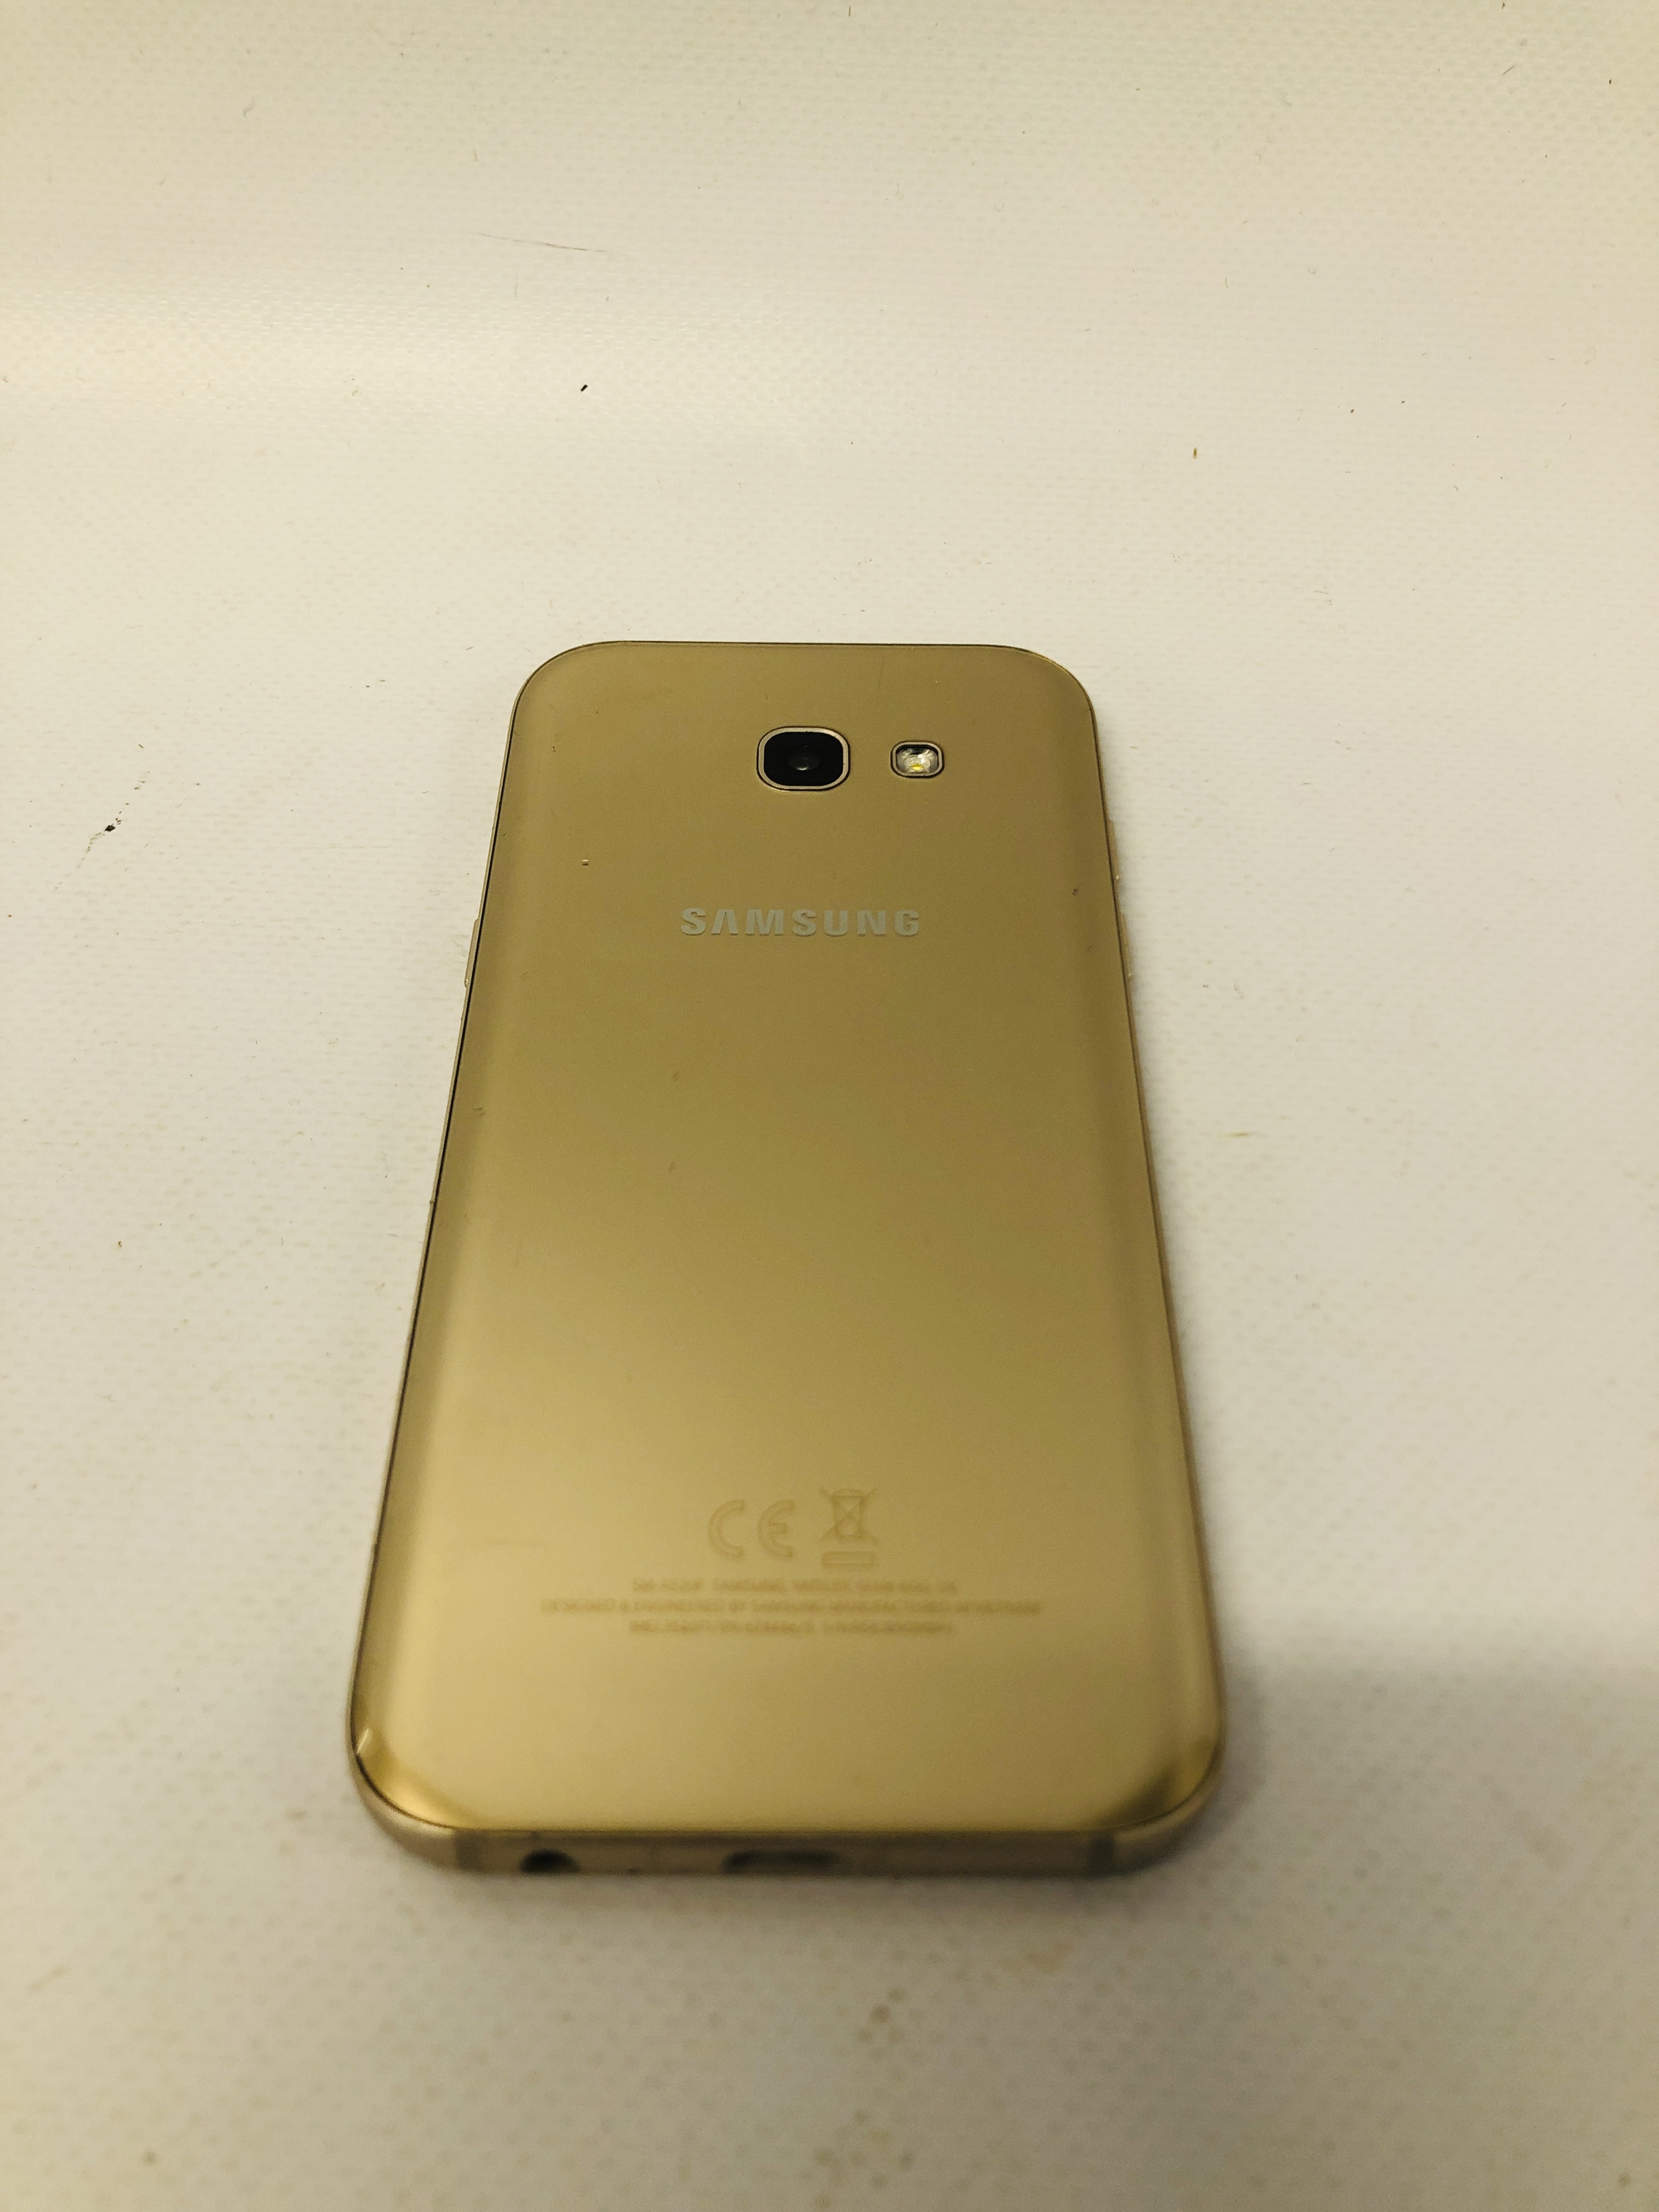 A SAMSUNG GALAXY A5 SMARTPHONE - SOLD AS SEEN - NO GUARANTEE OF CONNECTIVITY - Image 4 of 4